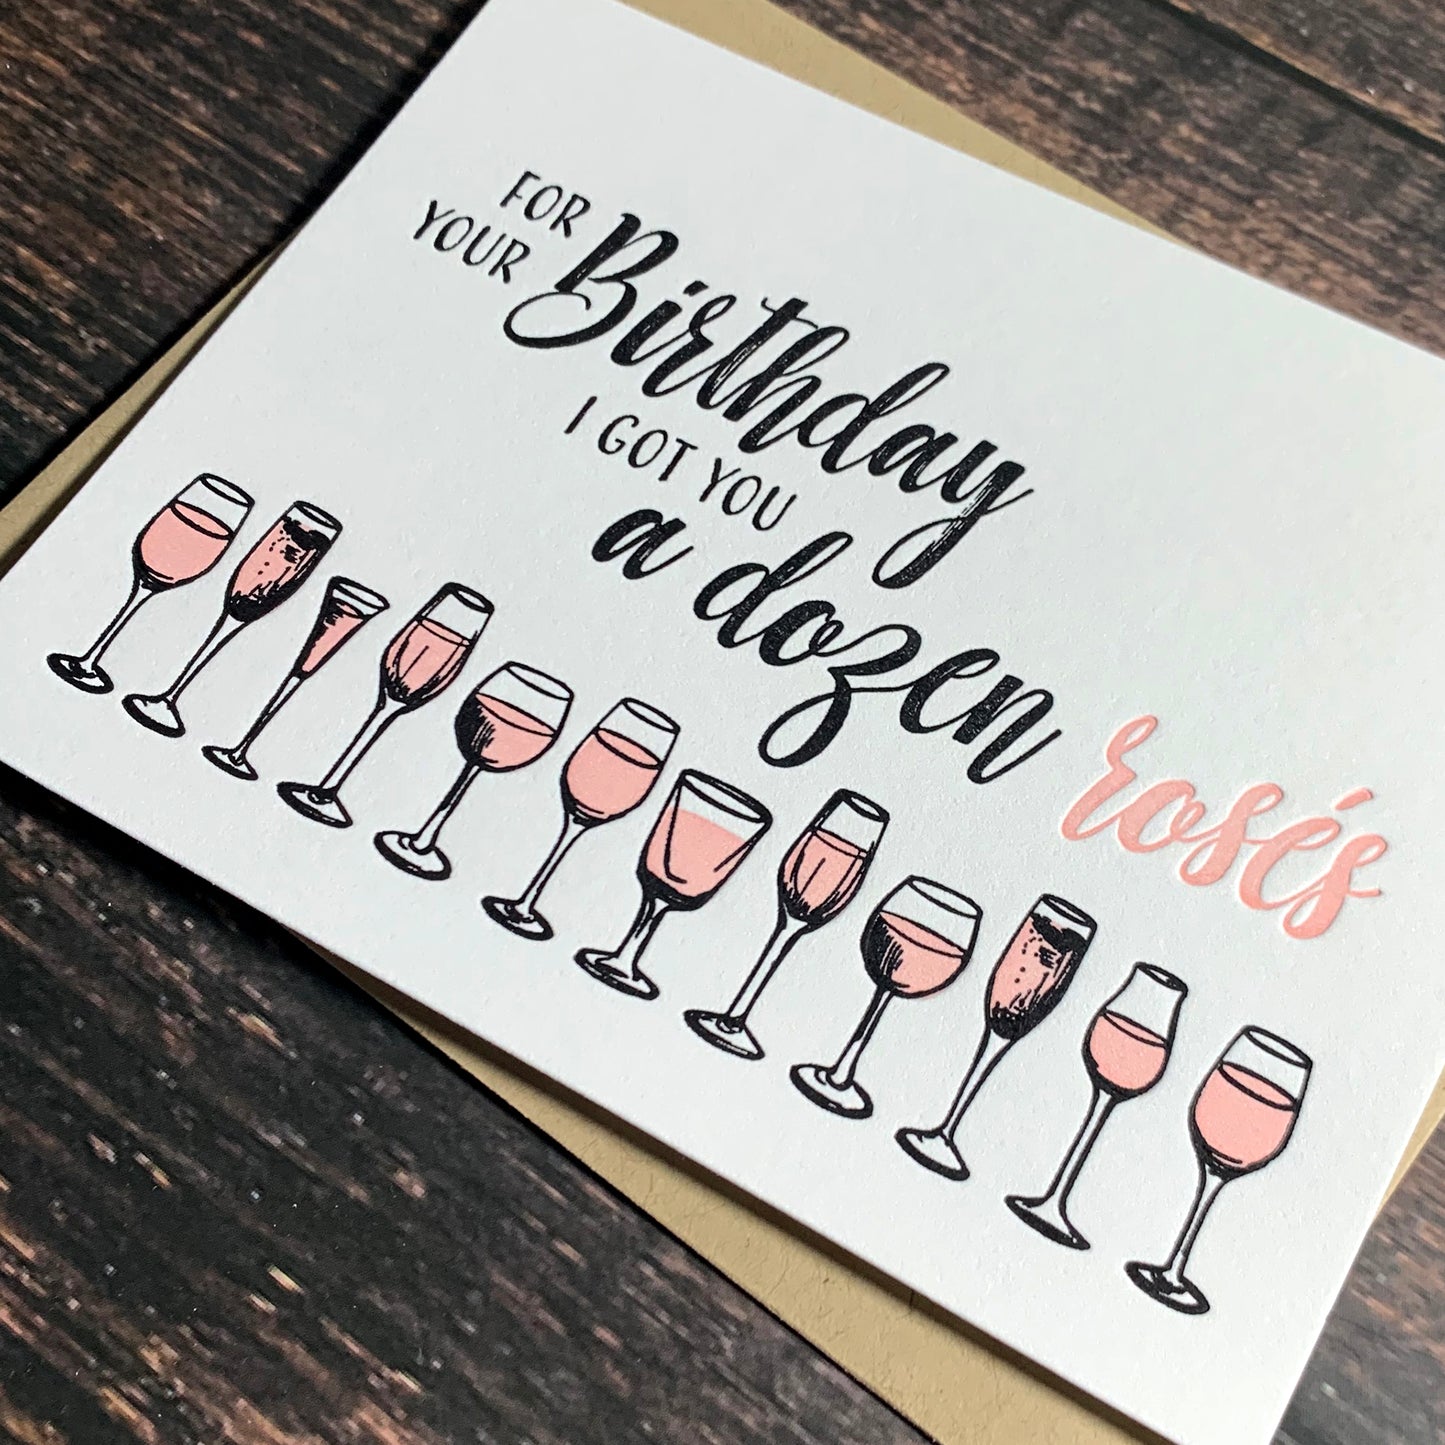 For your birthday I got you a dozen rosés, funny wine birthday card, Letterpress printed, view shows letterpress impression, includes envelope